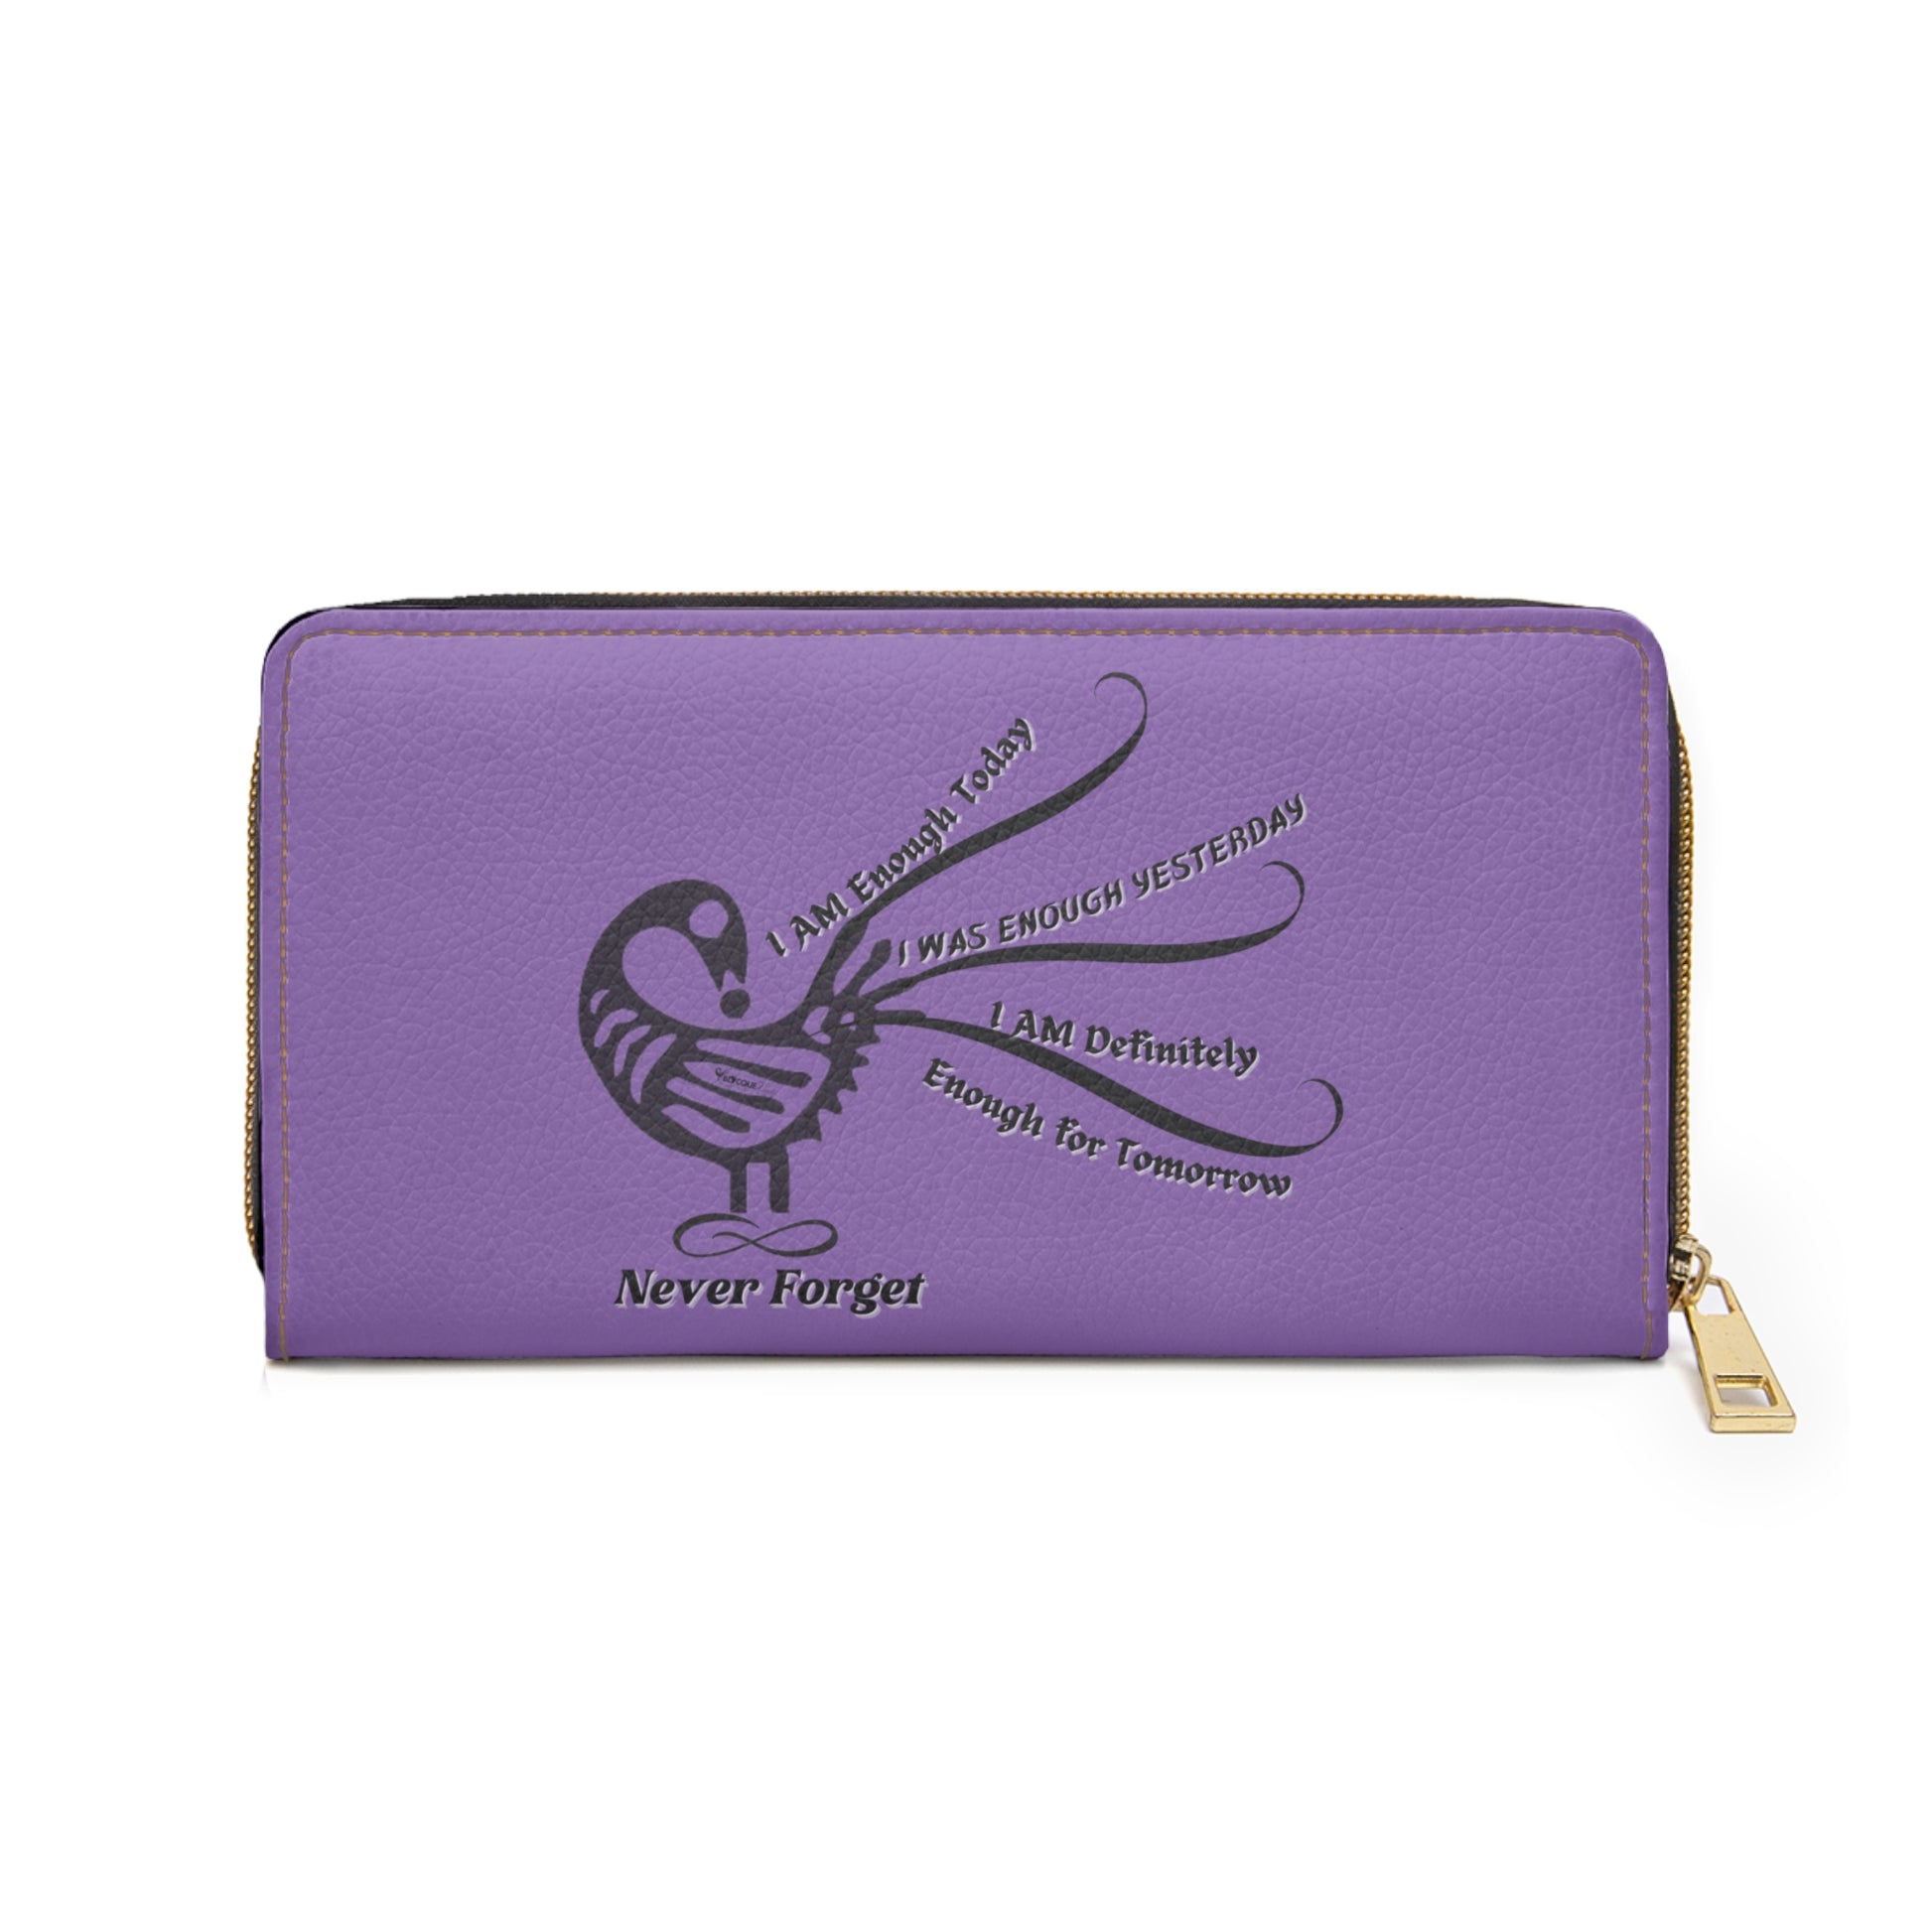 I AM More Than Enough- Positive Afrocentric Affirmation Vegan Leather Wallet Bag- Empower Your Style and Self-Love ; Purple Wallet